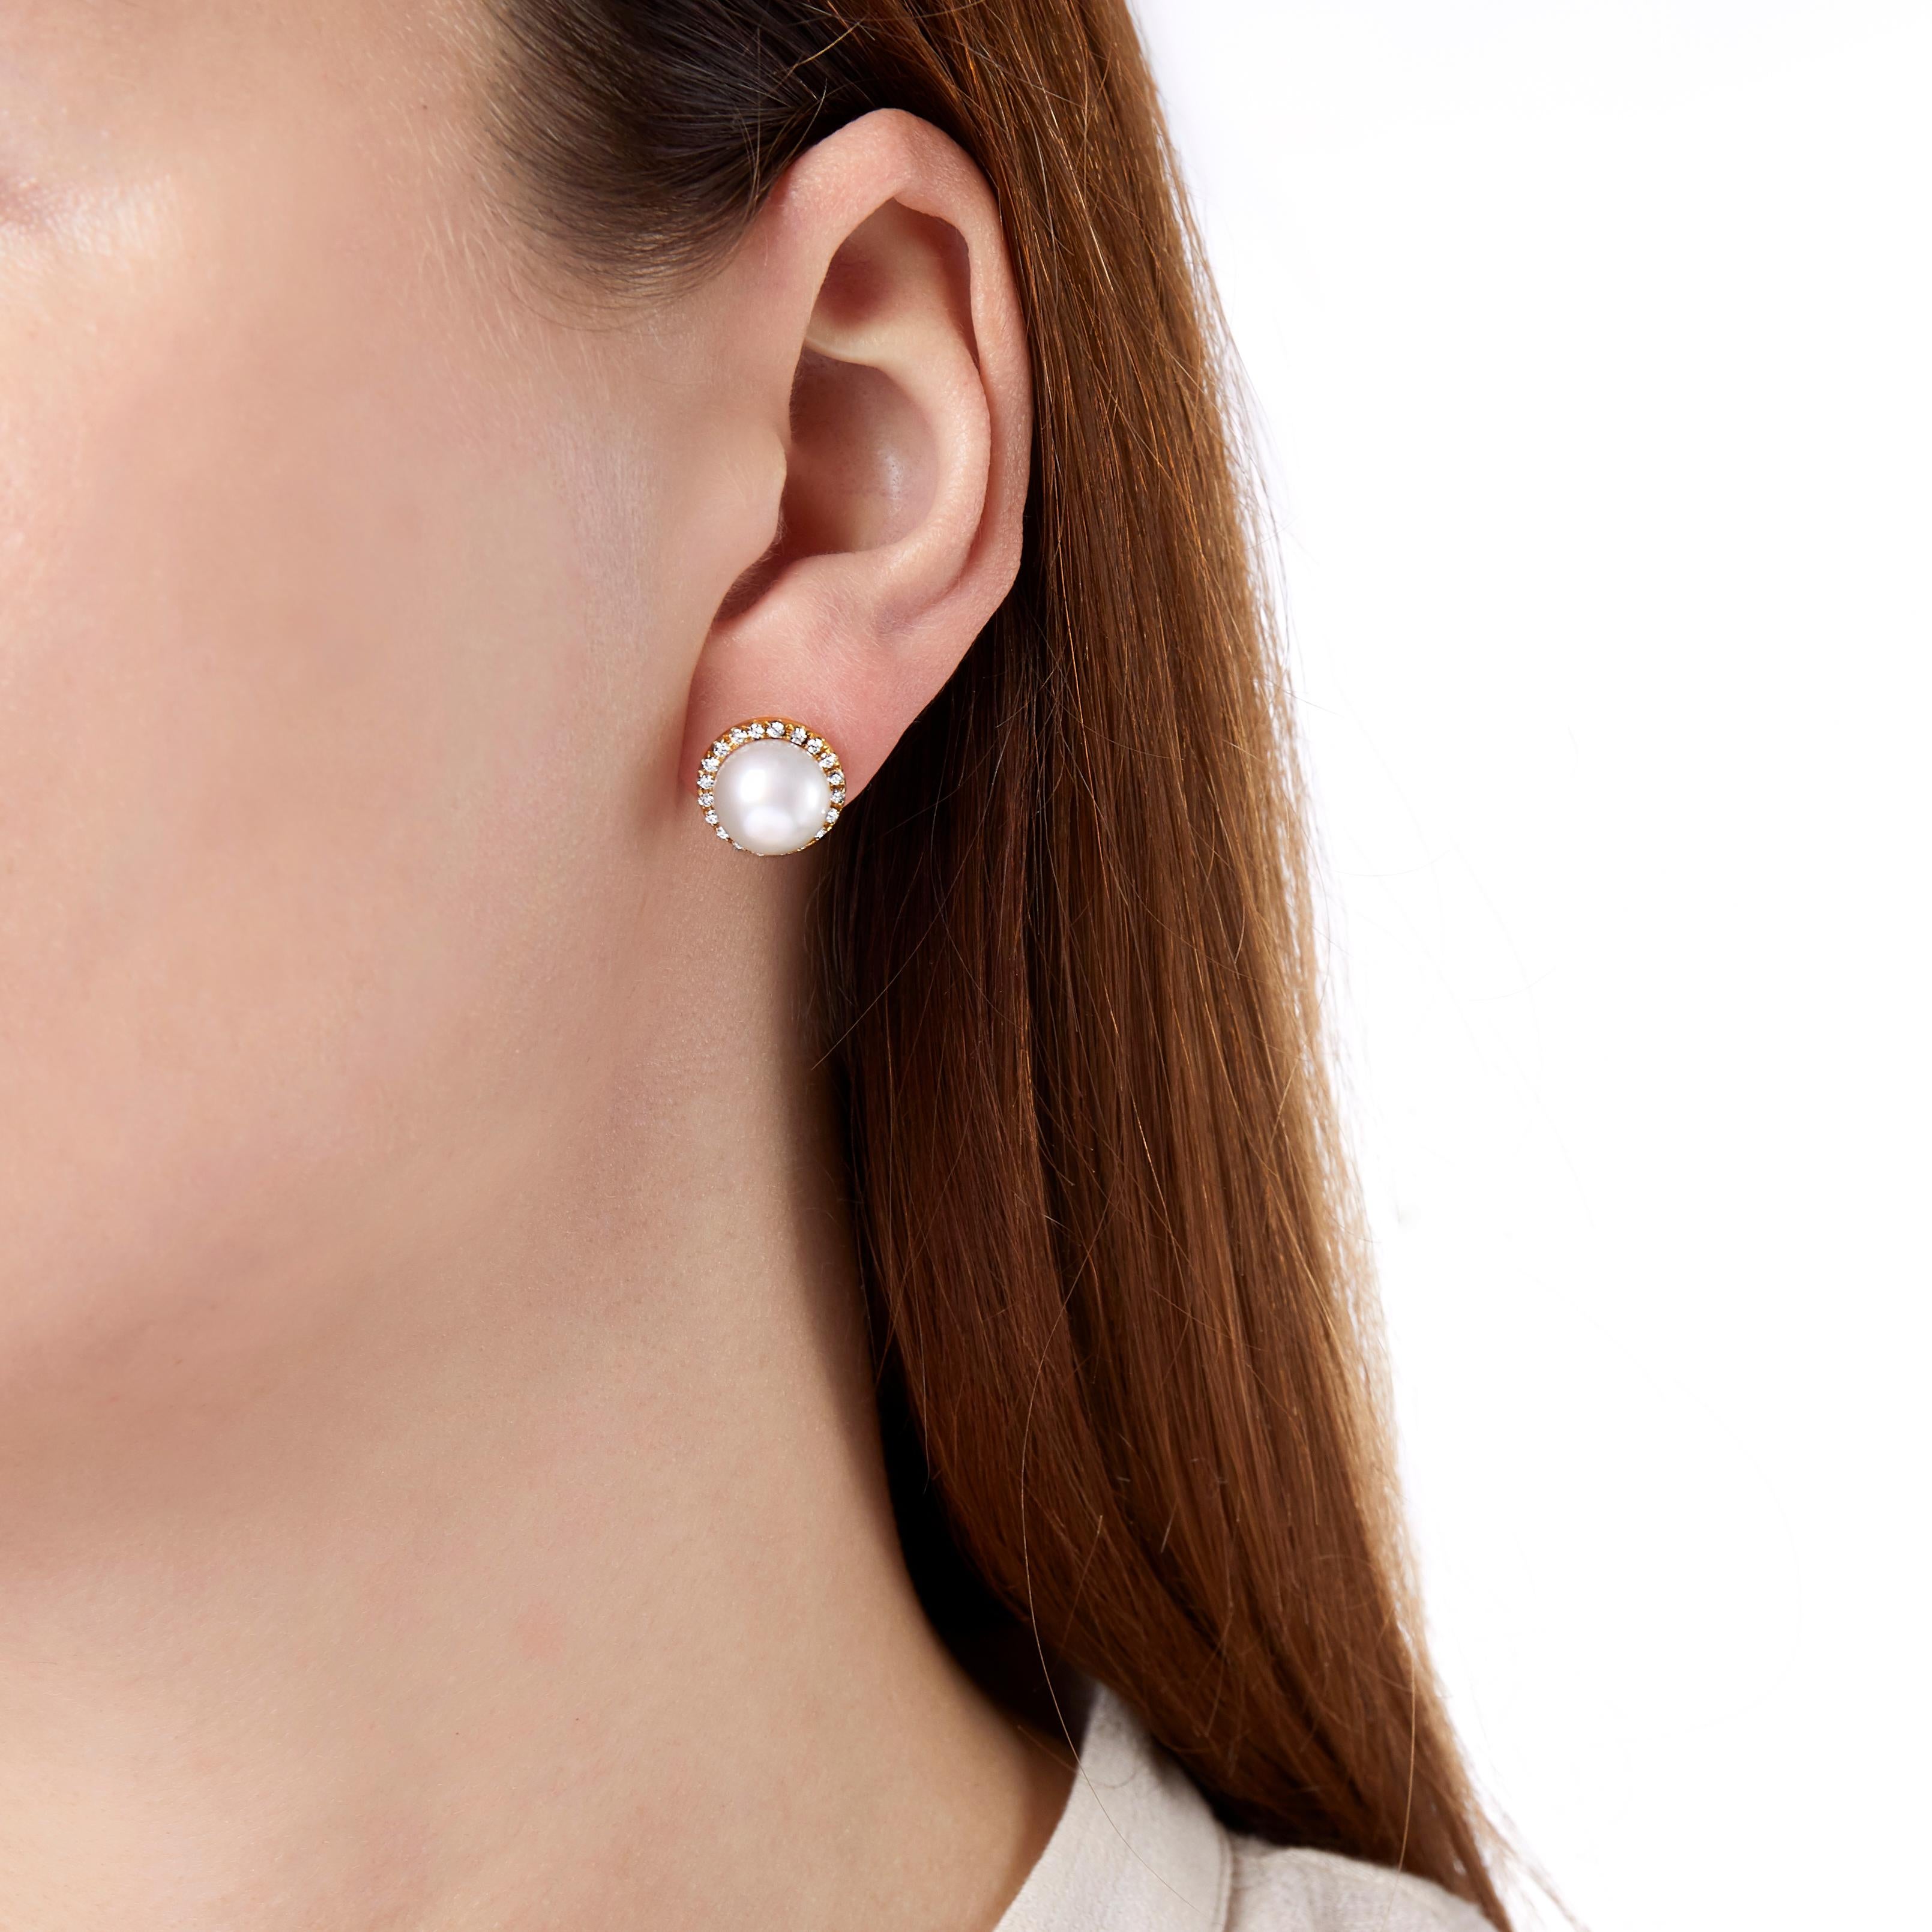 These striking earrings by Yoko London feature South Sea pearls surrounded by a halo of diamonds. Flawlessly engineered in our London atelier, these elegant earrings are perfect for pairing with both daytime and evening outfits – they would make a